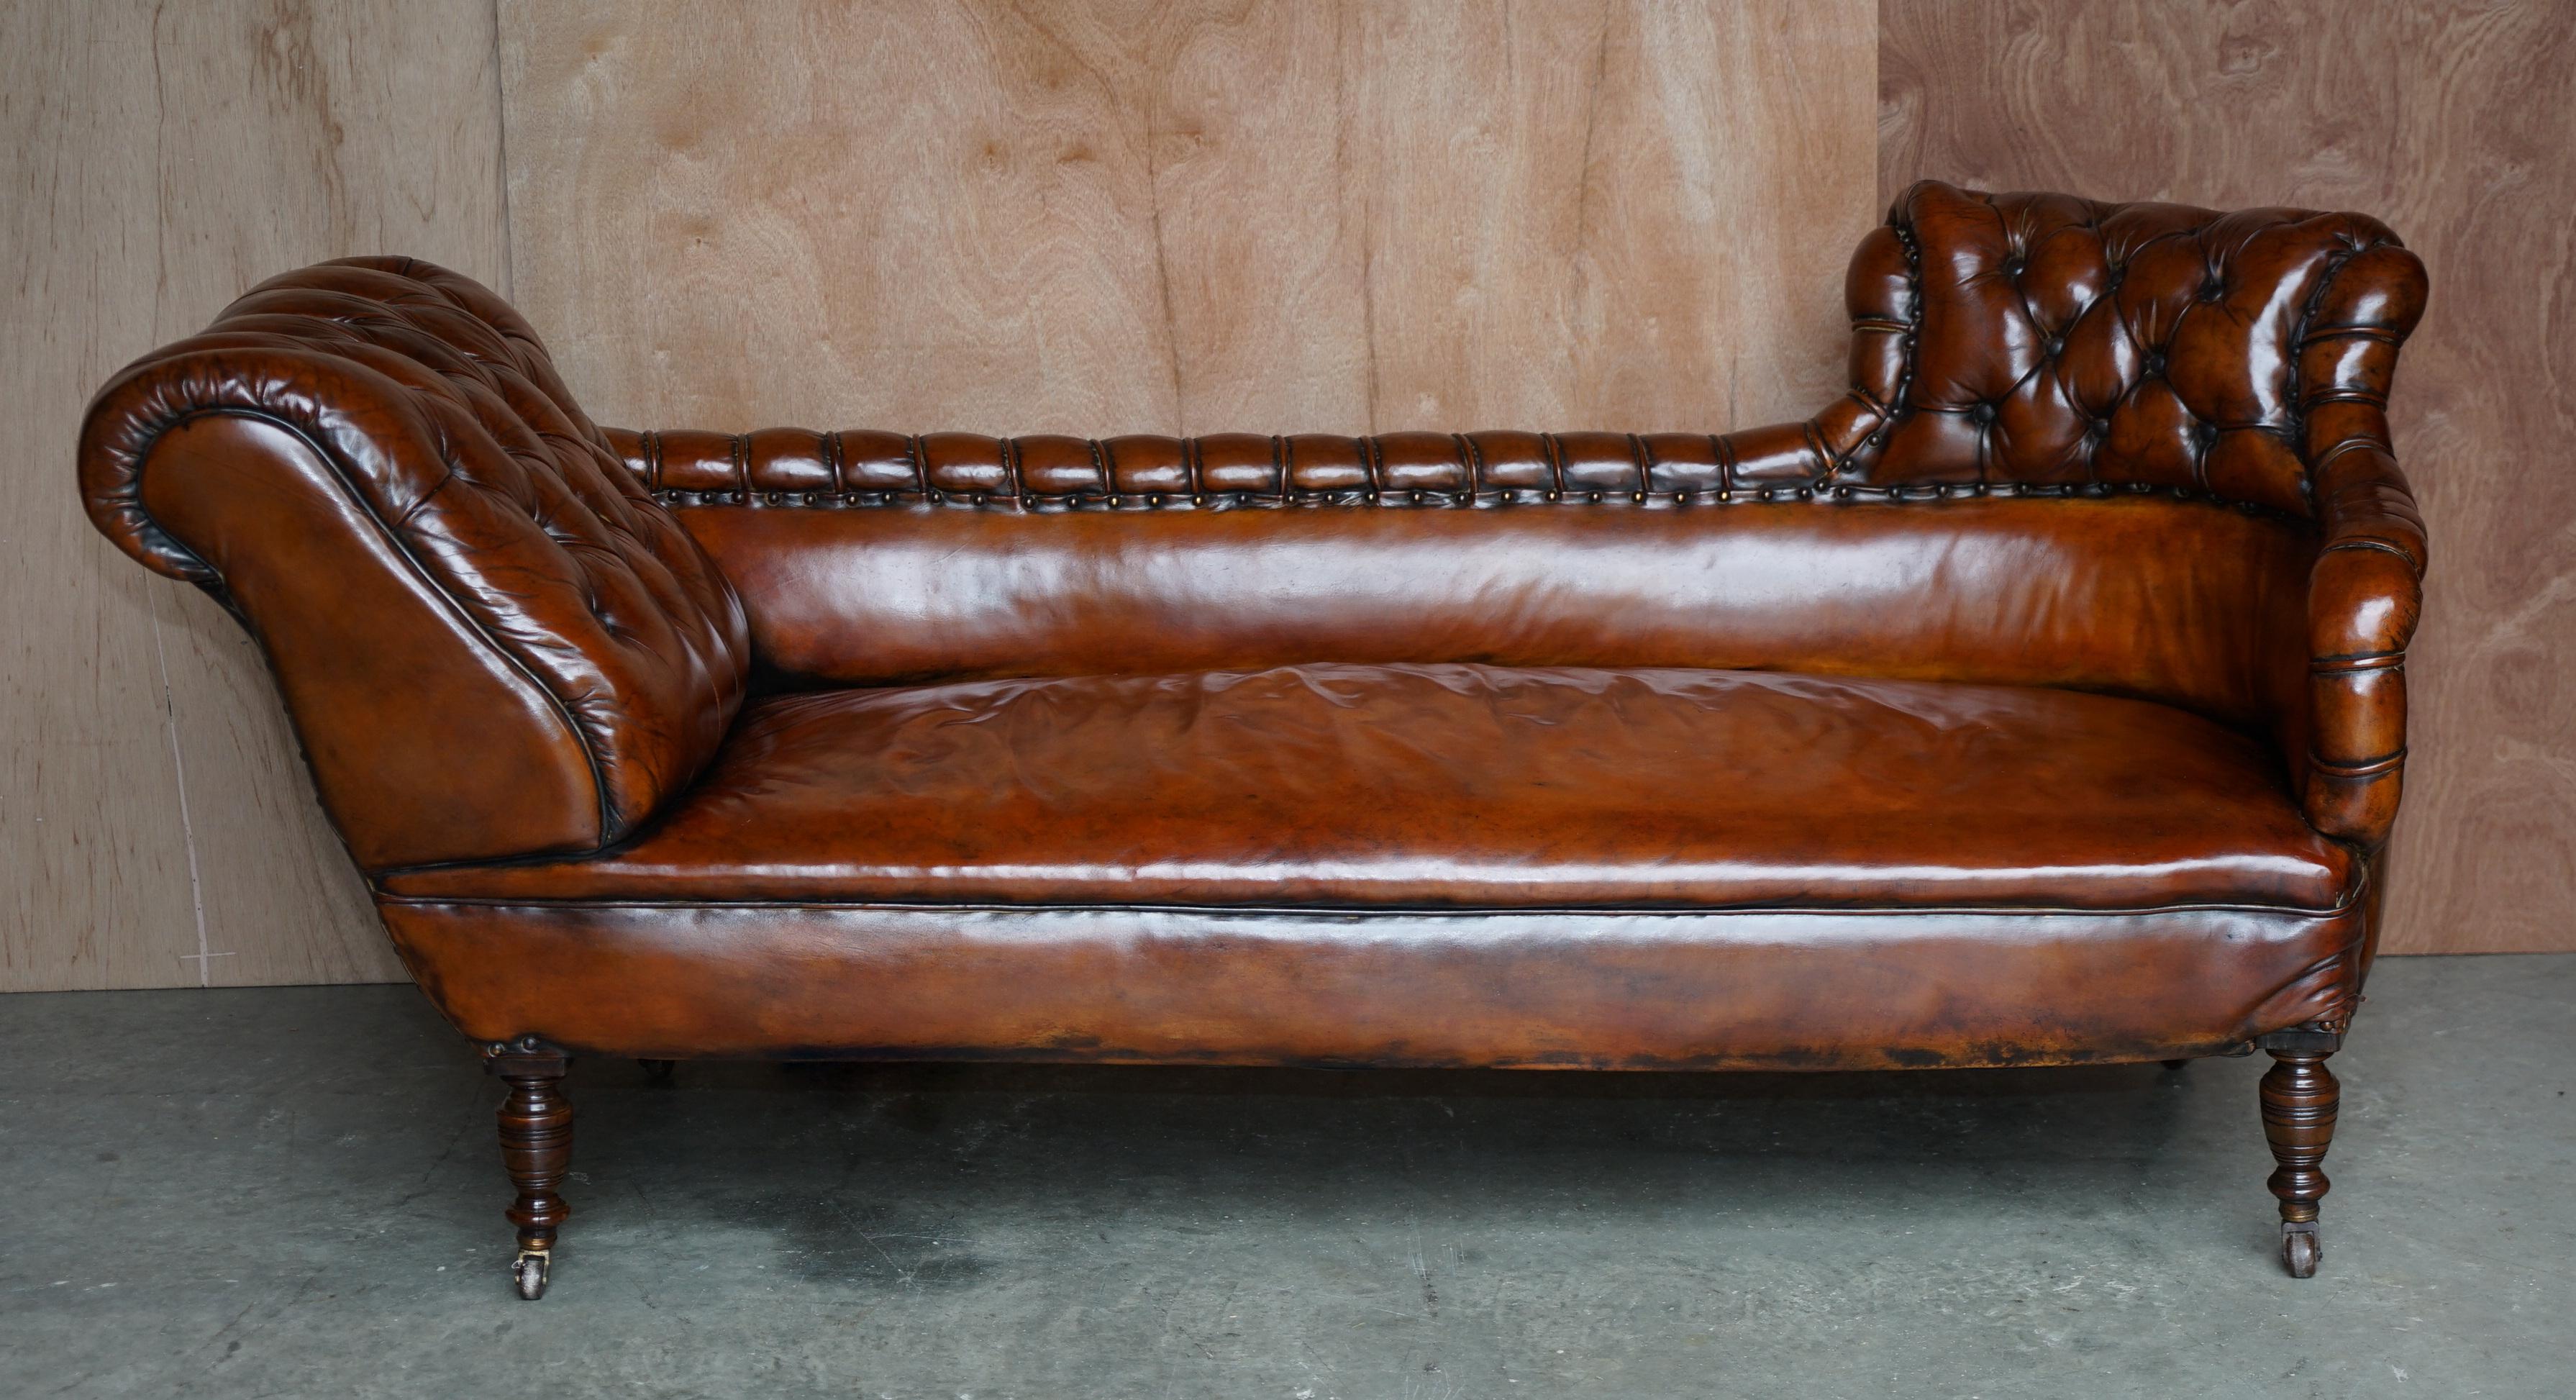 We are delighted to offer this very rare fully restored Chesterfield tufted sofa chaise lounge in whiskey brown leather.

A very rare example, I have never seen this back before, it is an English piece but has a very continental feel to it. The